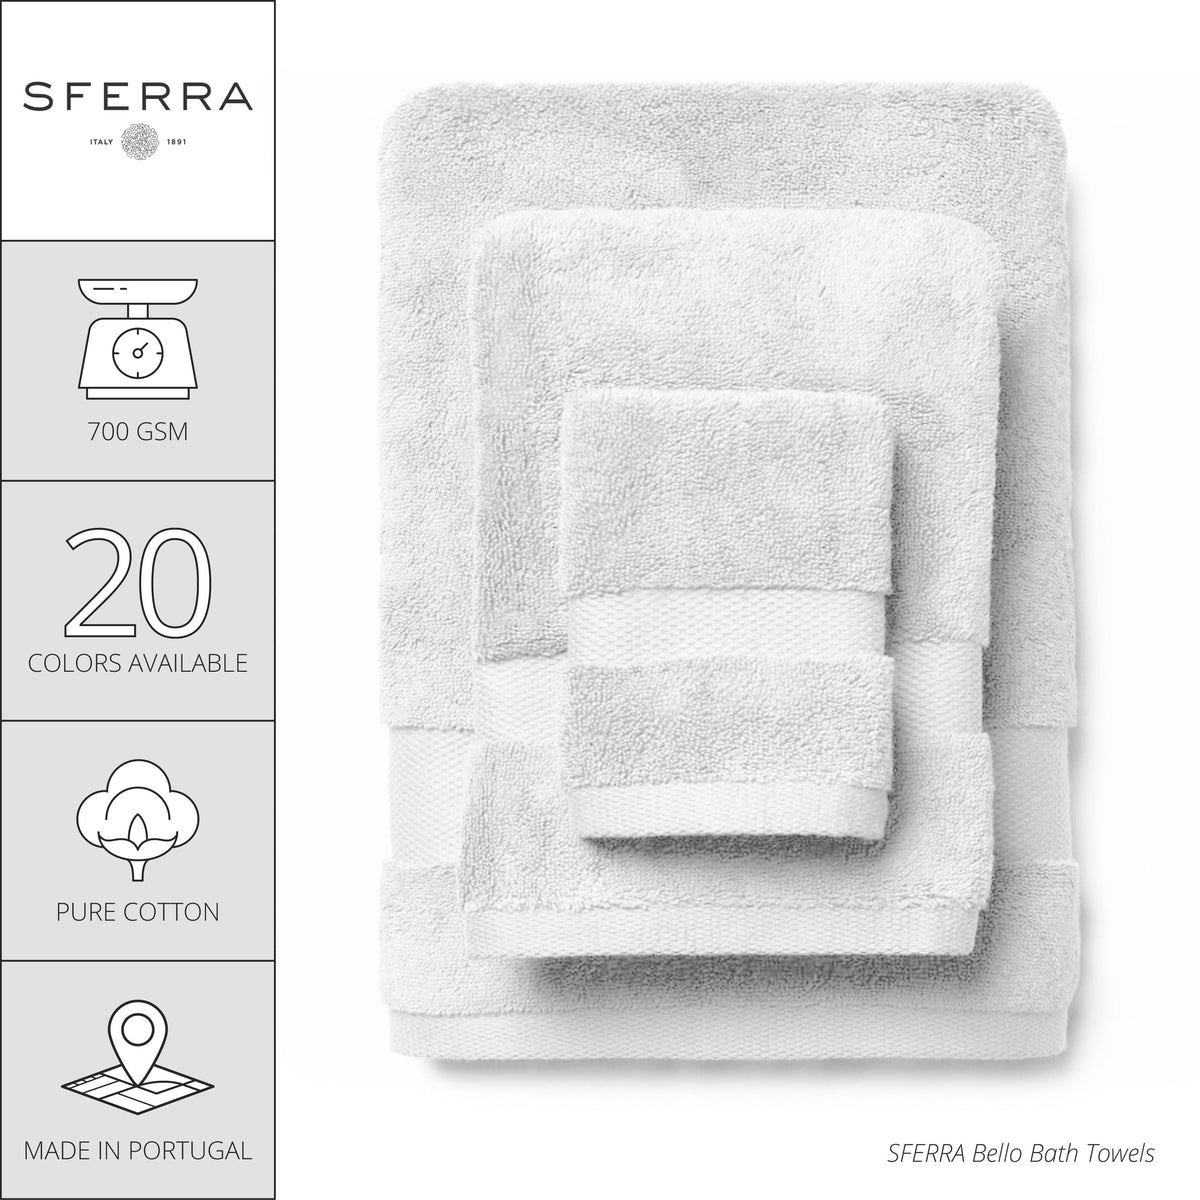 Infographic of Sferra Bello Bath Towels and Mats